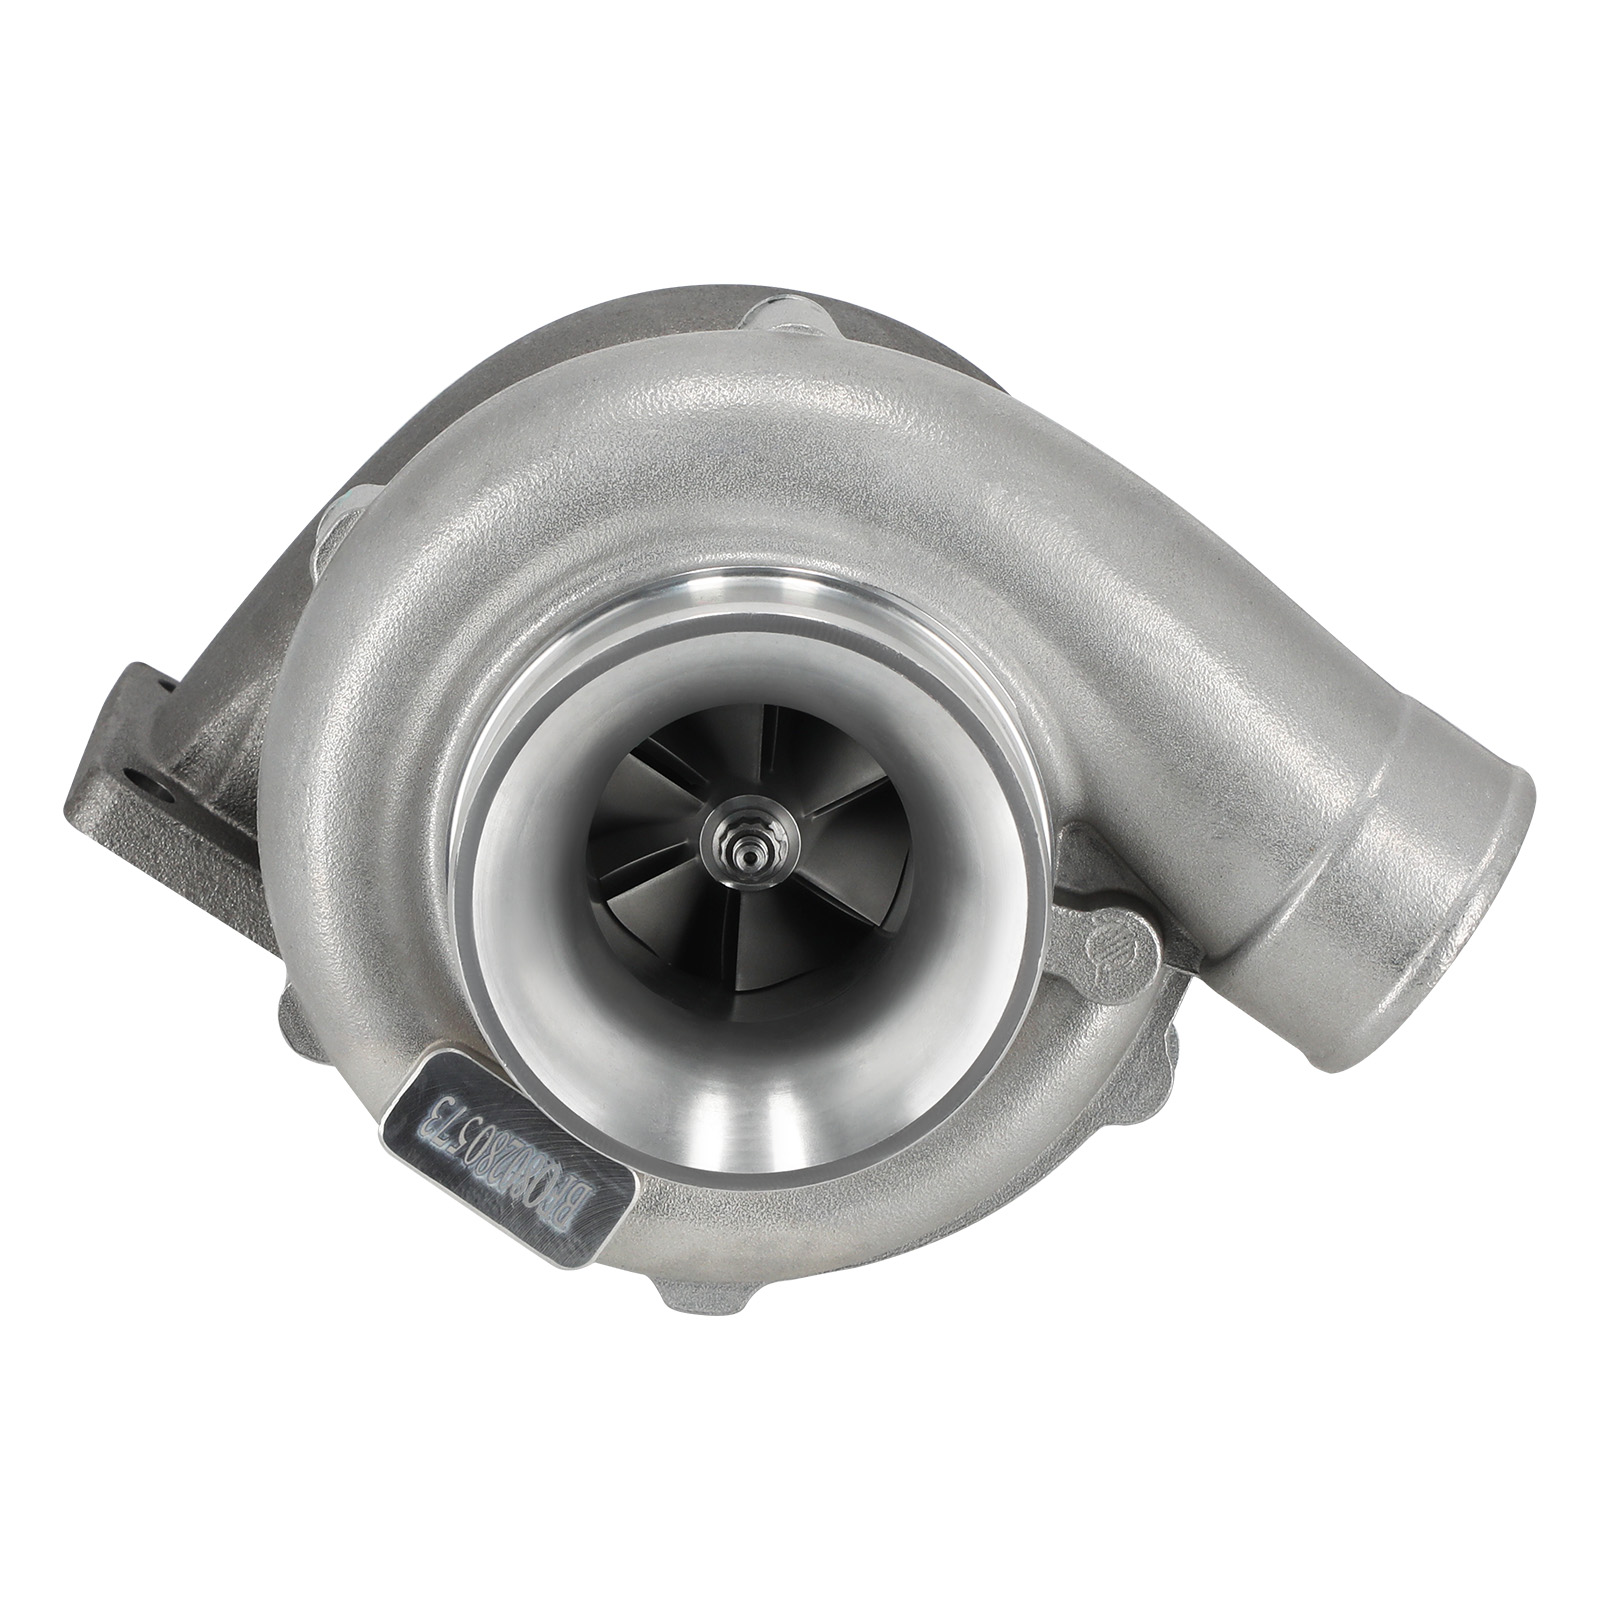 T70 .70 A/R 0.82A/R T3 V Band Flange Oil Cooled Universal Turbocharger 500+HP